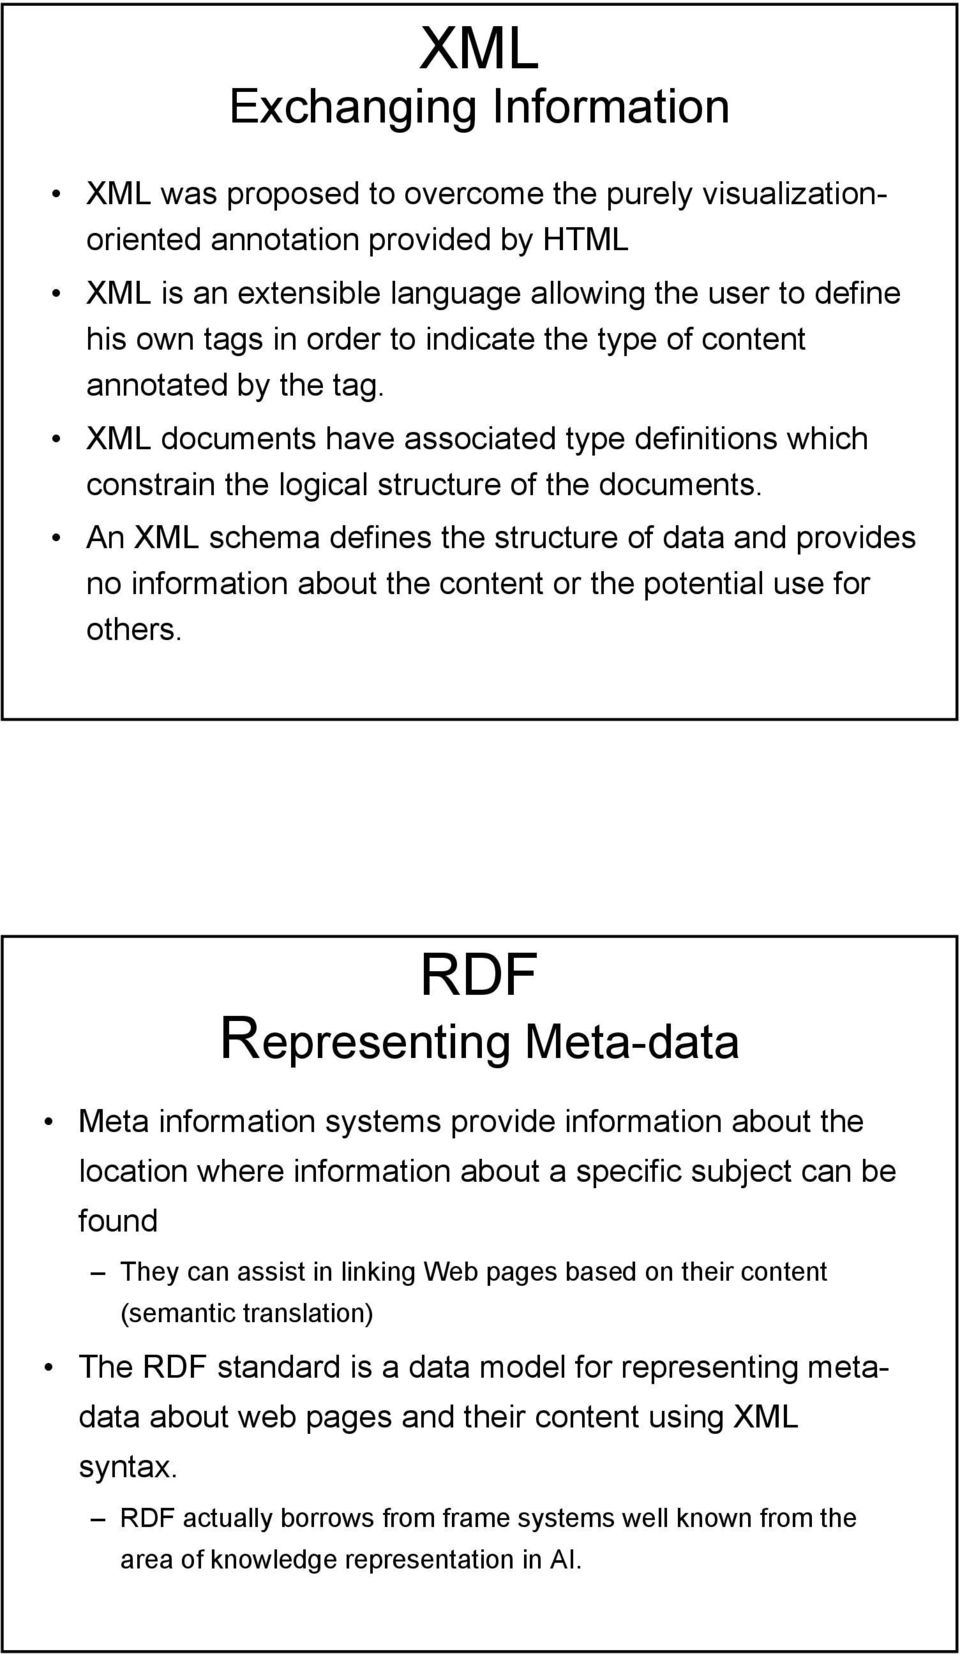 An XML schema defines the structure of data and provides no information about the content or the potential use for others.